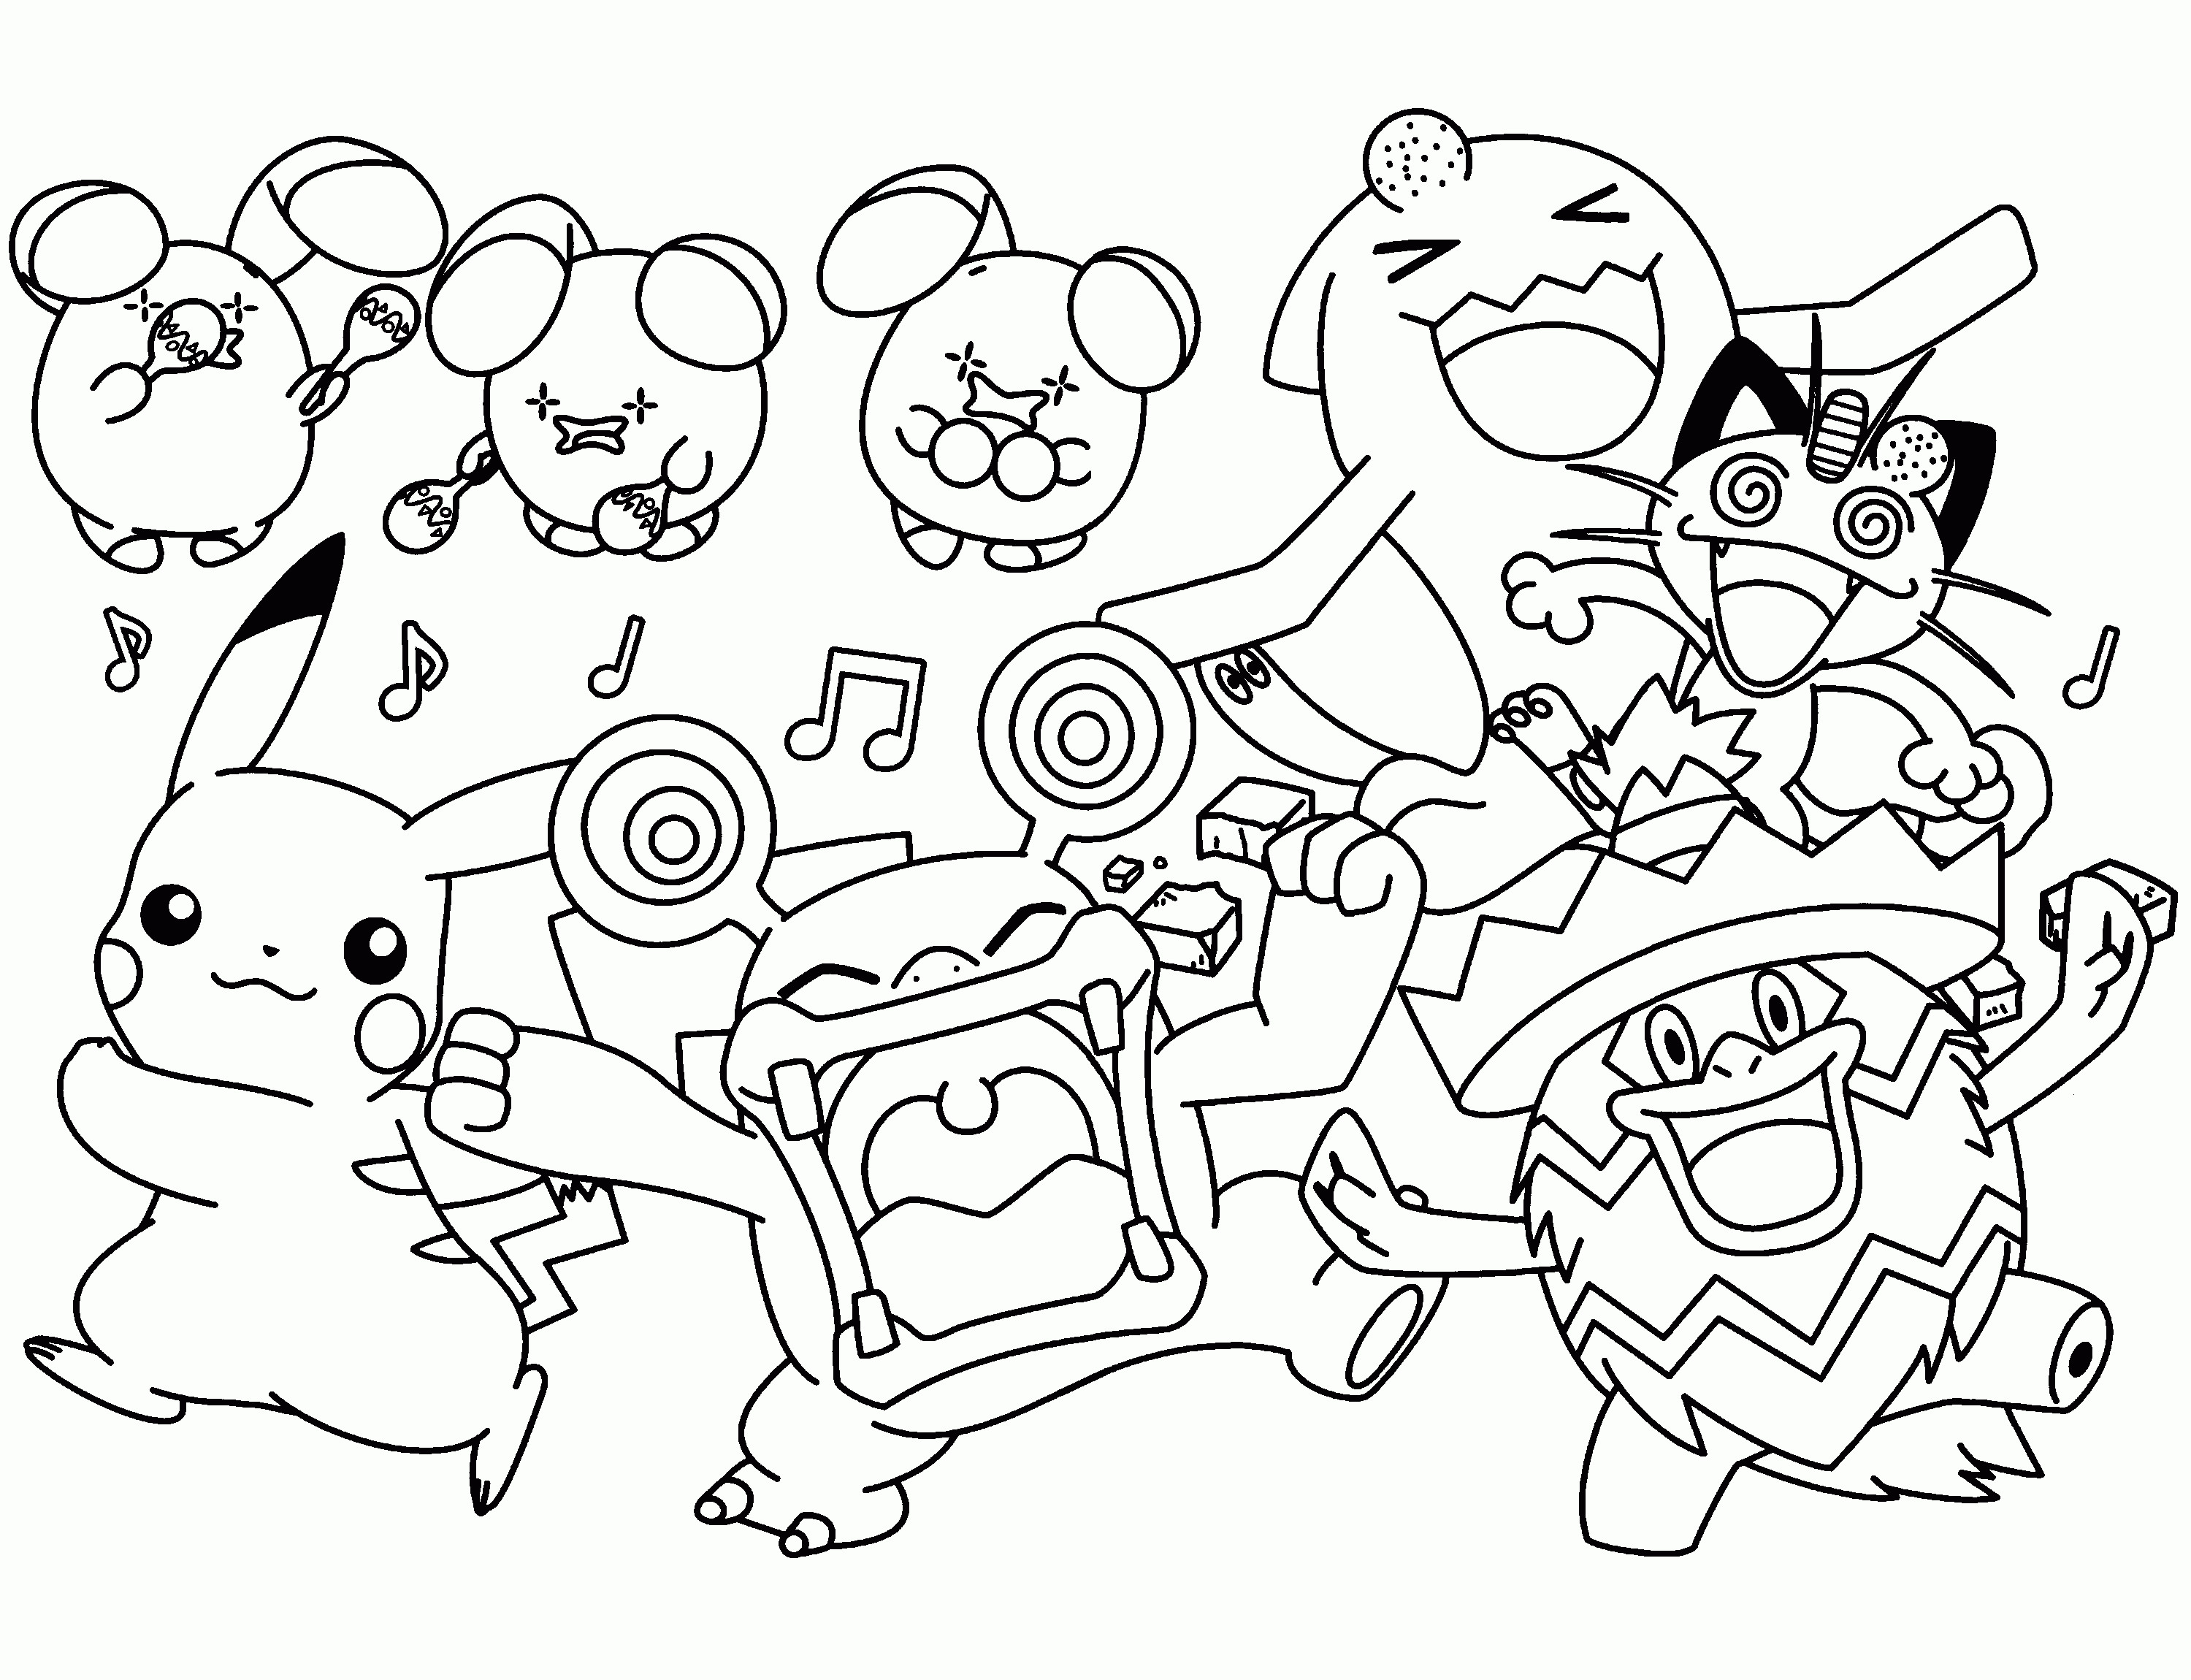 Pokemon Coloring Pages For Kids
 Pokemon free to color for children All Pokemon coloring